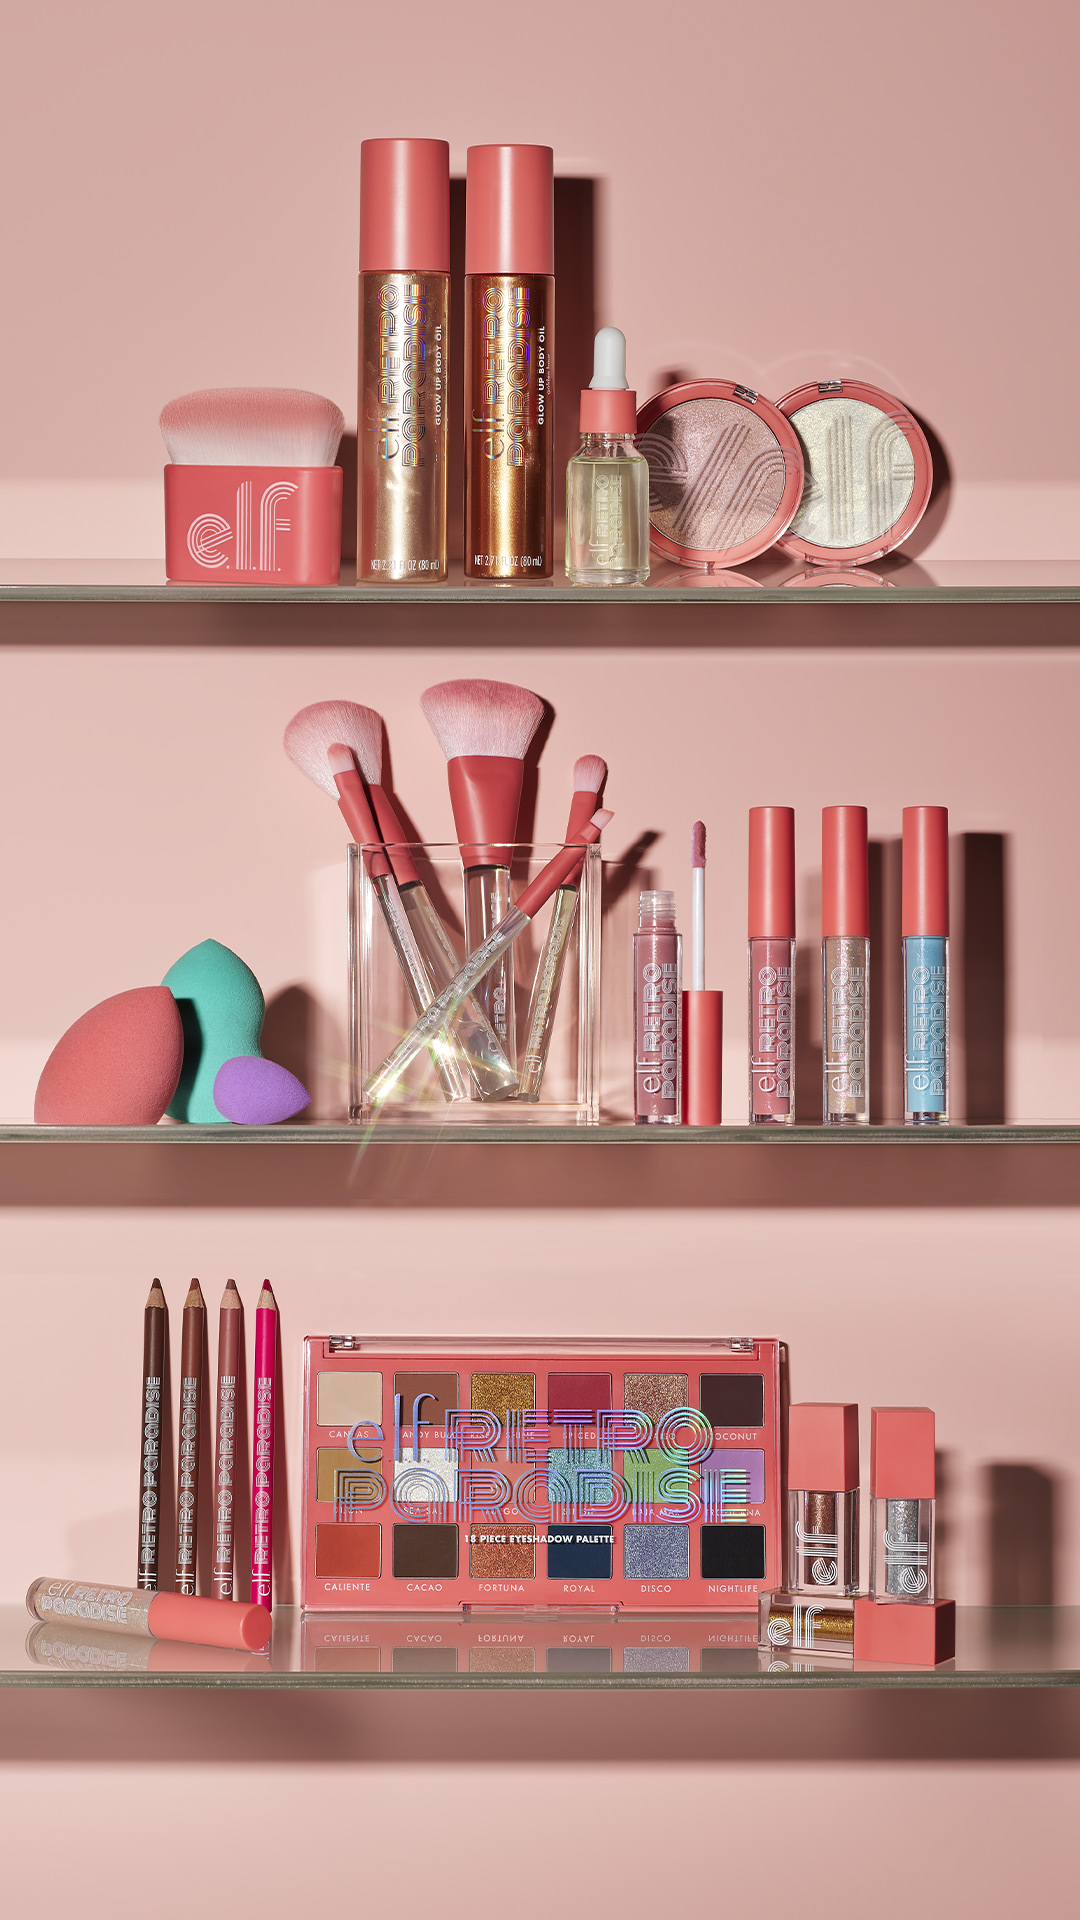 Beautyscape influencers launch e.l.f. collection